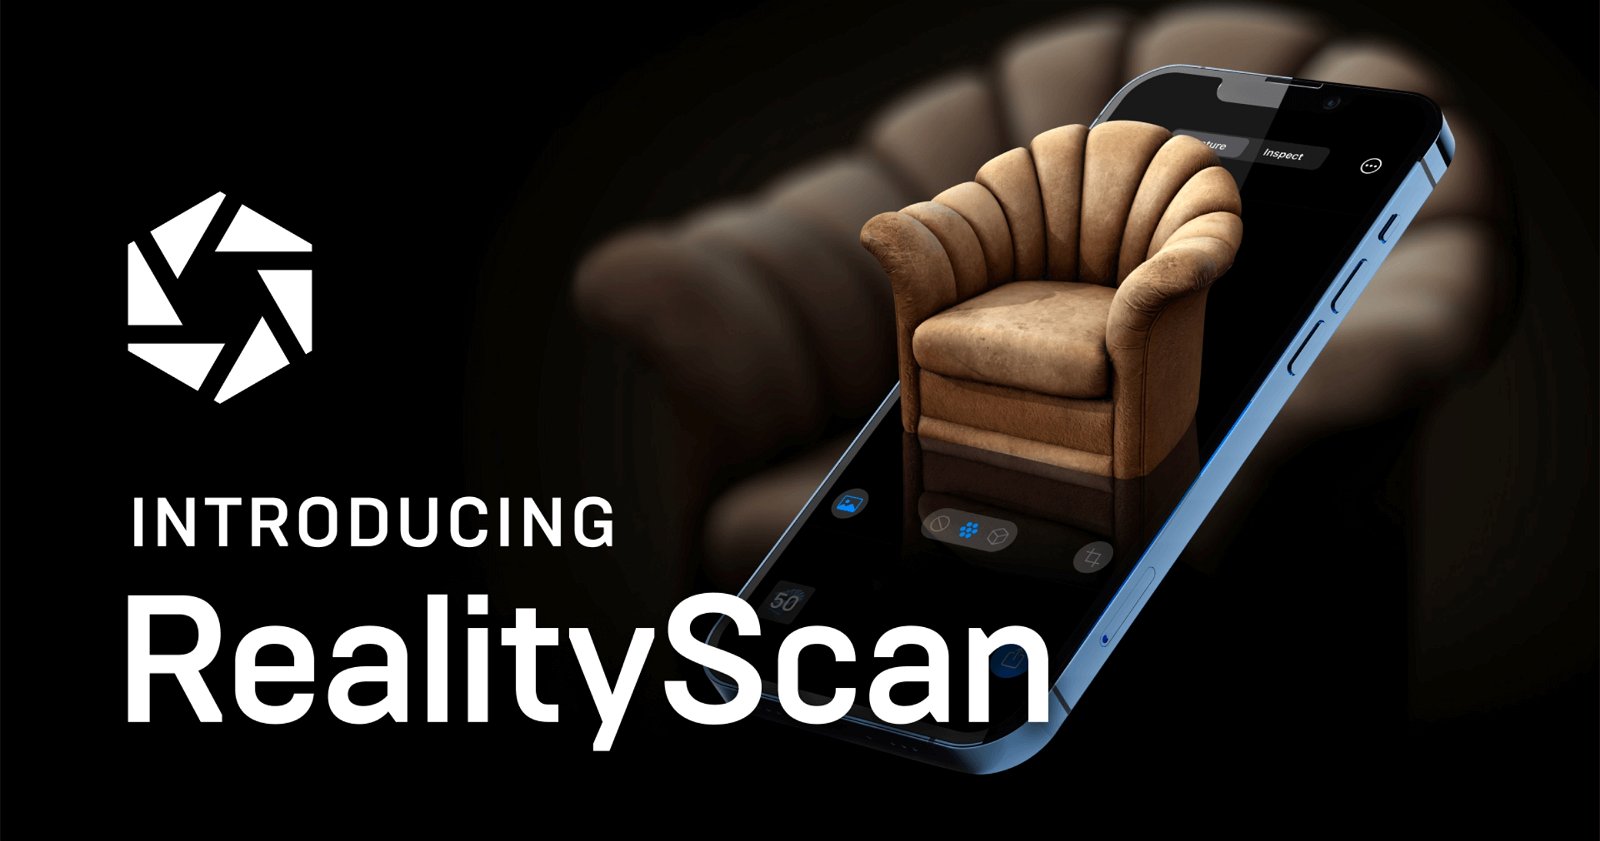 New Epic Games app lets you 3D scan any object using the mobile camera